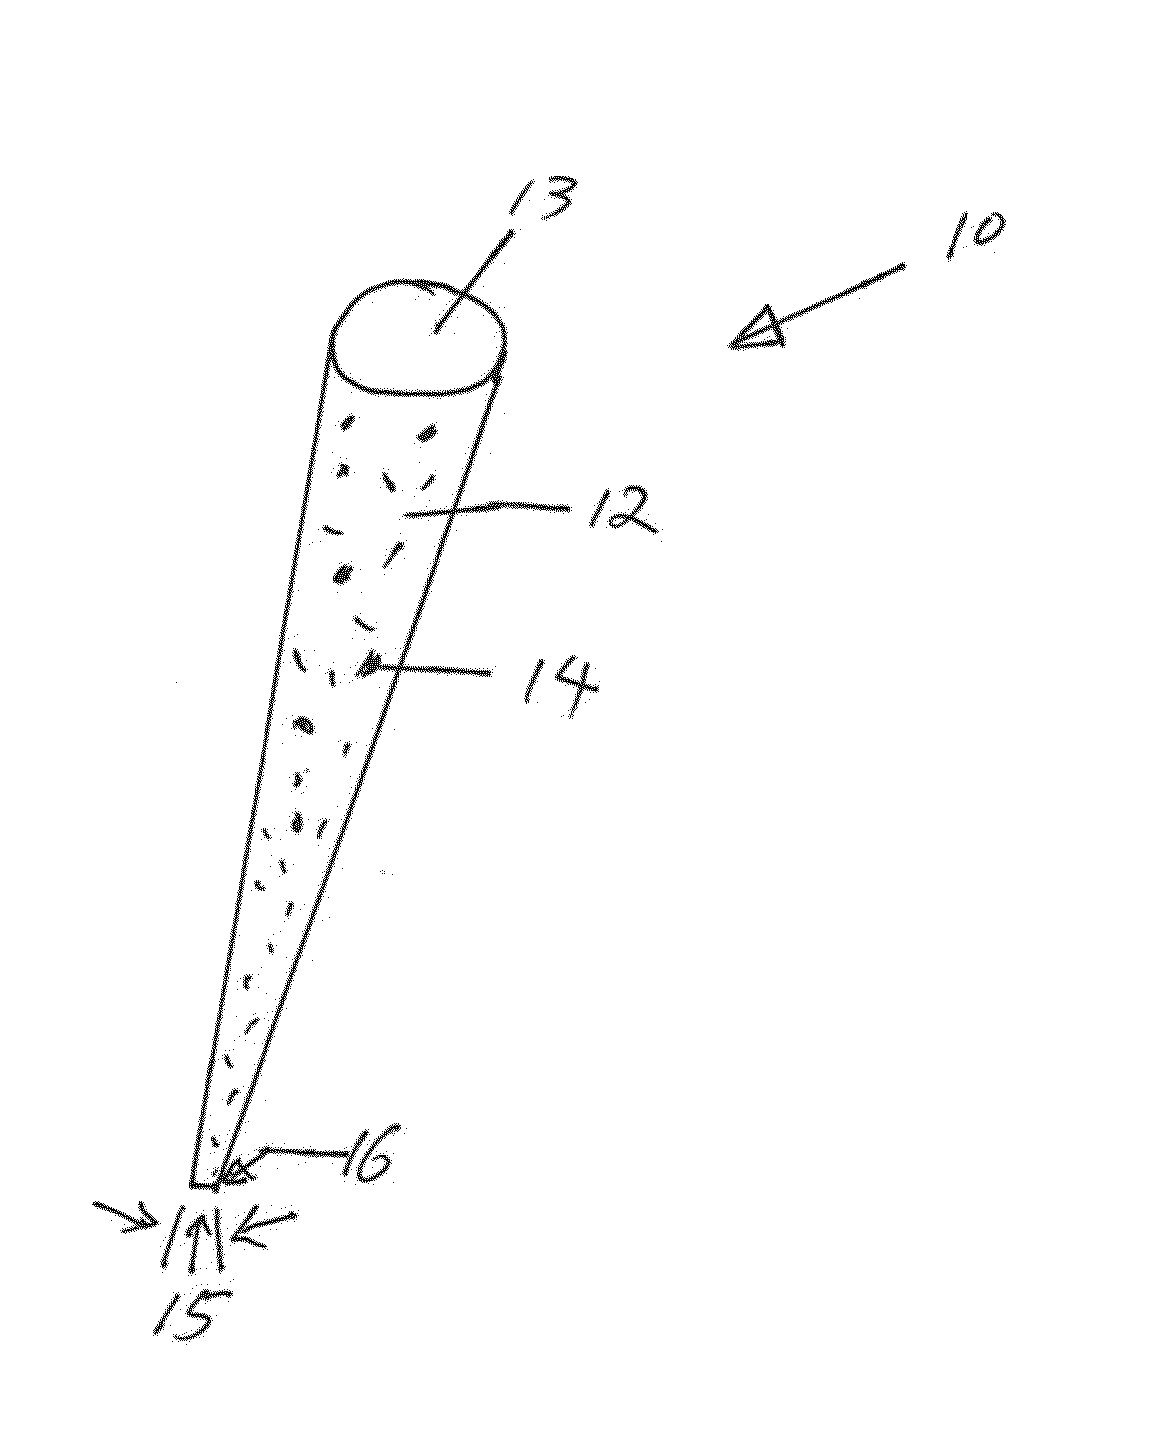 Dental root canal filling material having improved thermal conductive characteristics